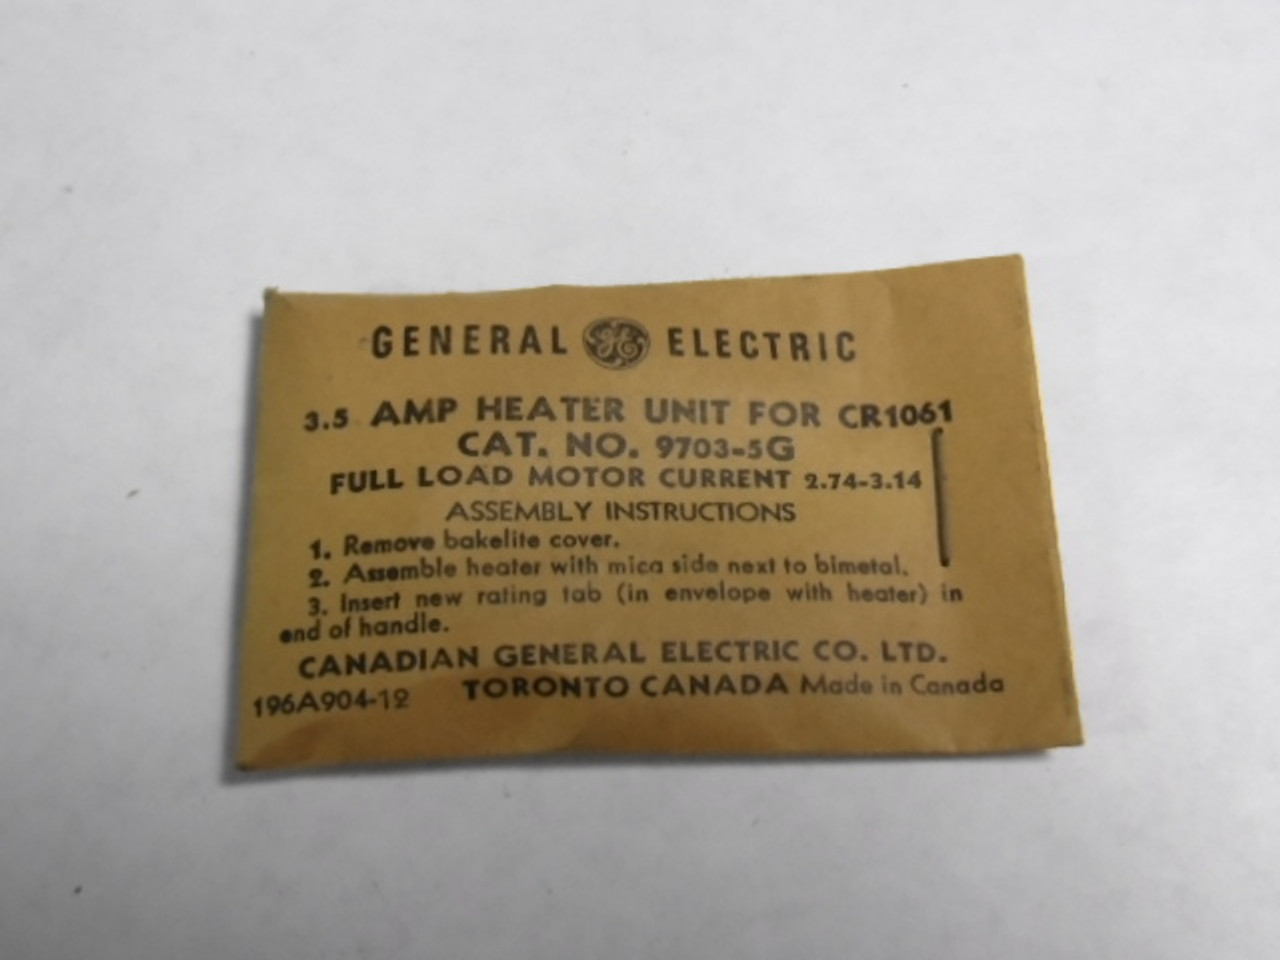 General Electric 9703-5G Overload Thermal Heater Unit 3.5A ! NWB !